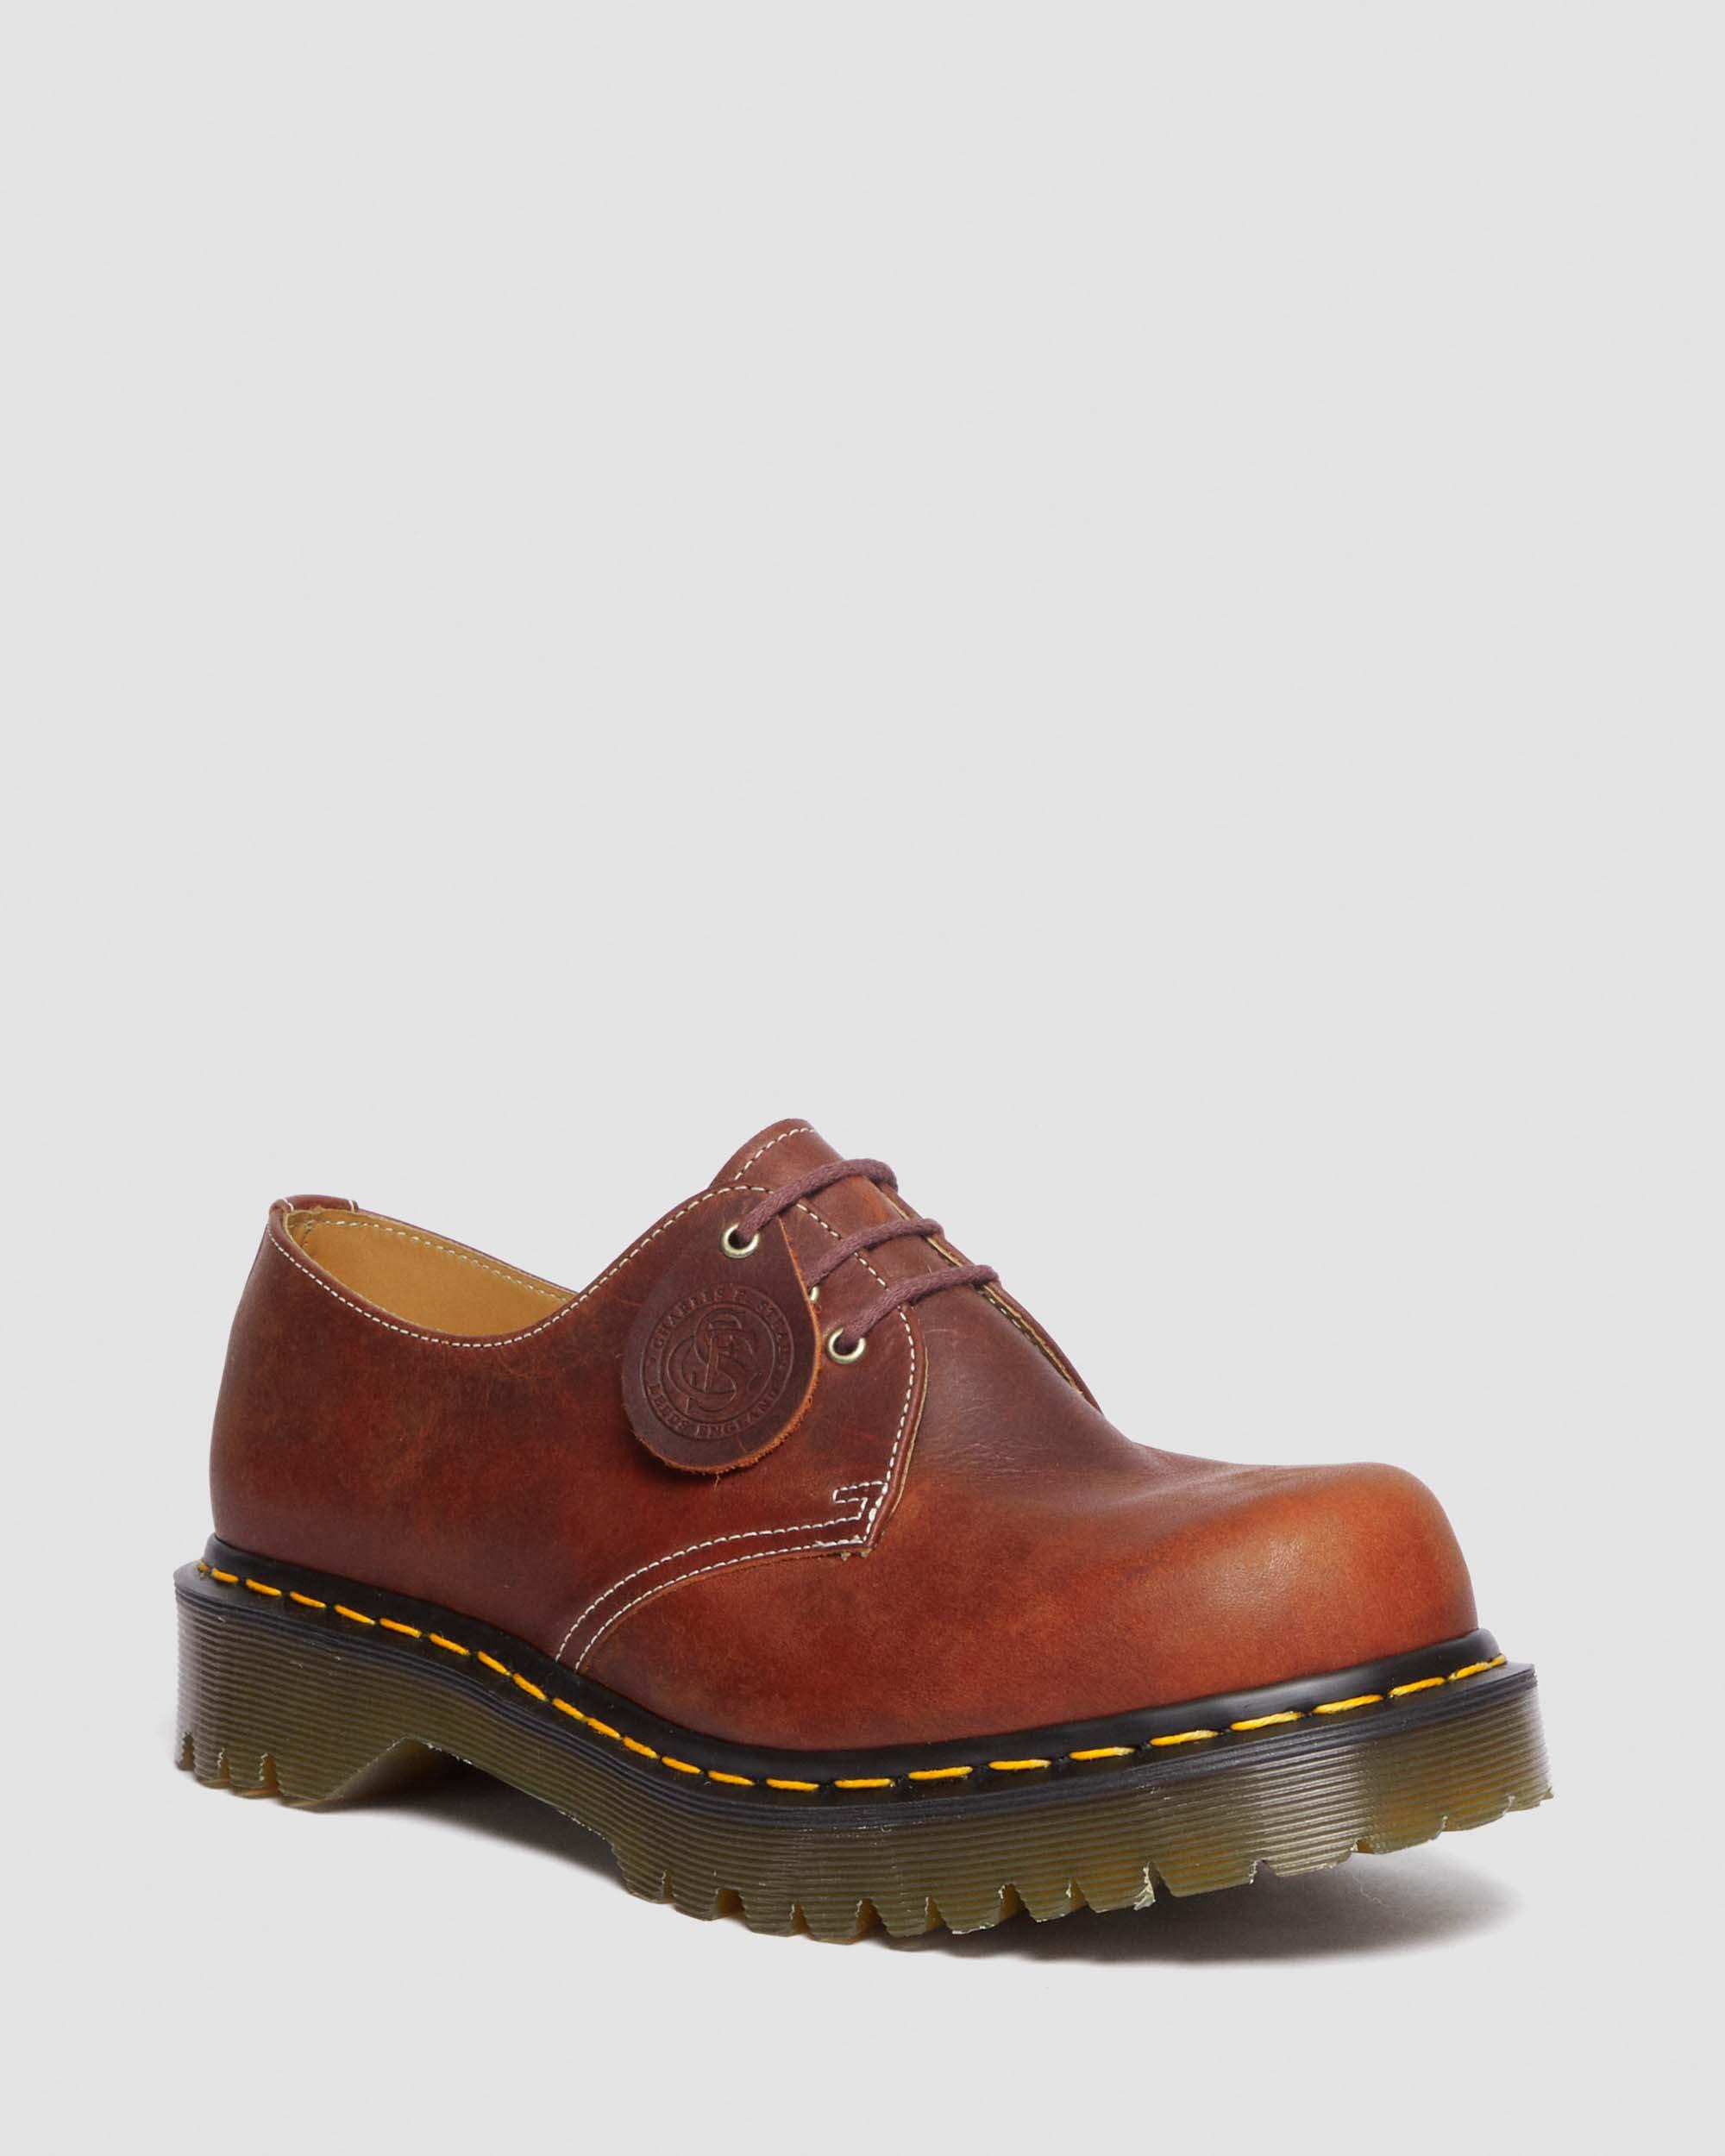 1461 Made in England Heritage Leather Oxford Shoes in Heritage Tan | Dr.  Martens